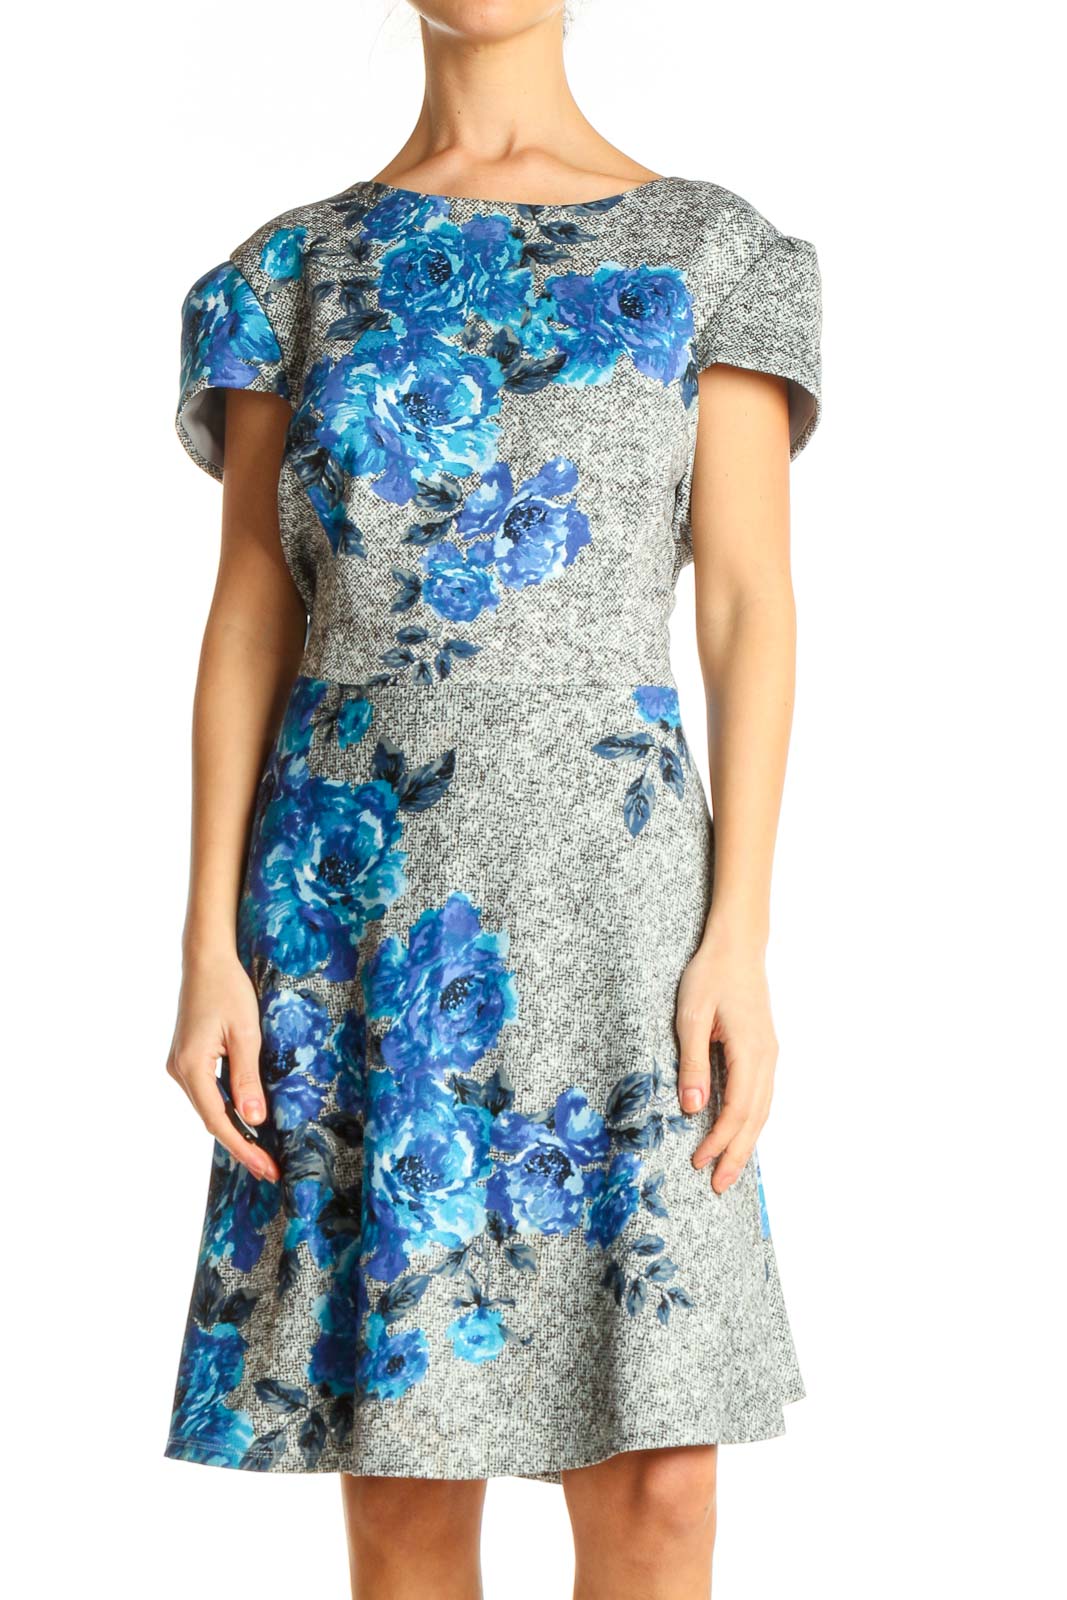 Gray Floral Print Fit & Flare Dress Front